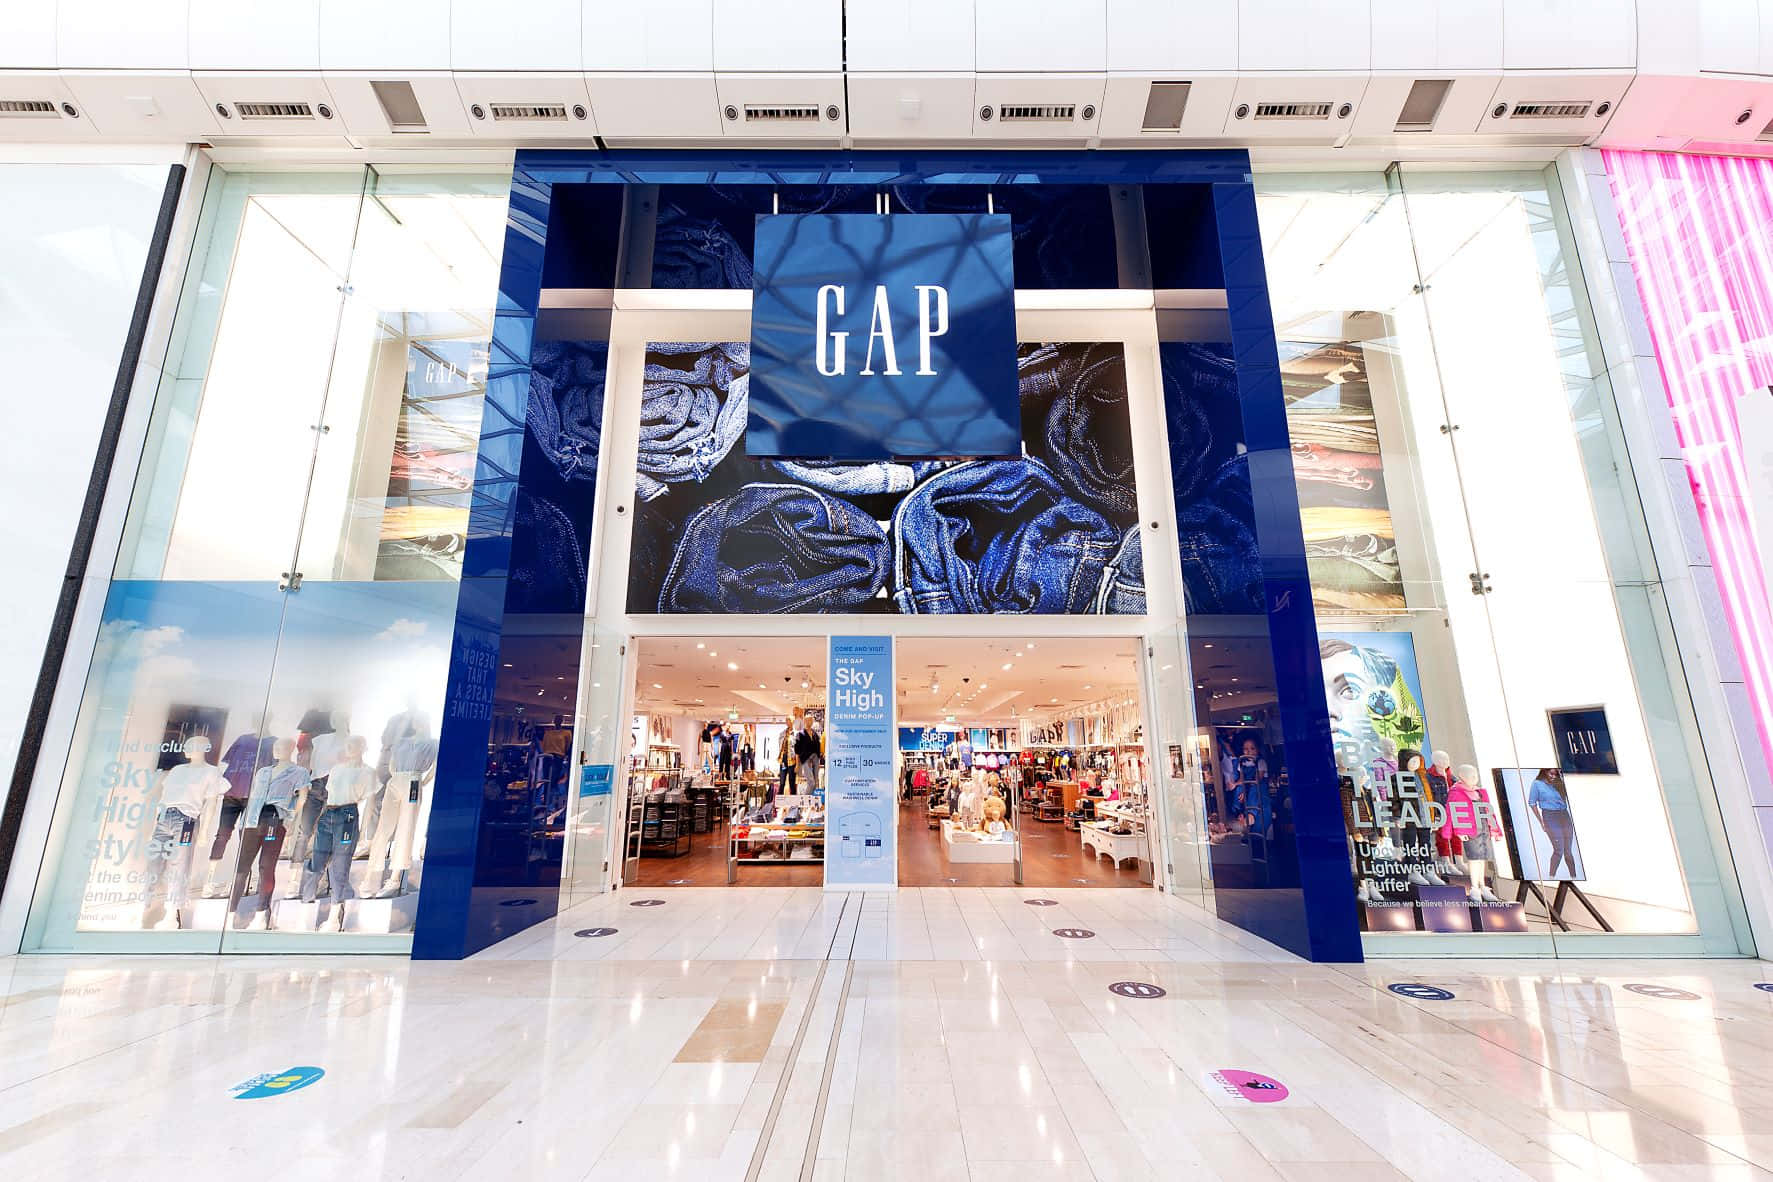 Gp Store In A Mall With Blue And White Walls